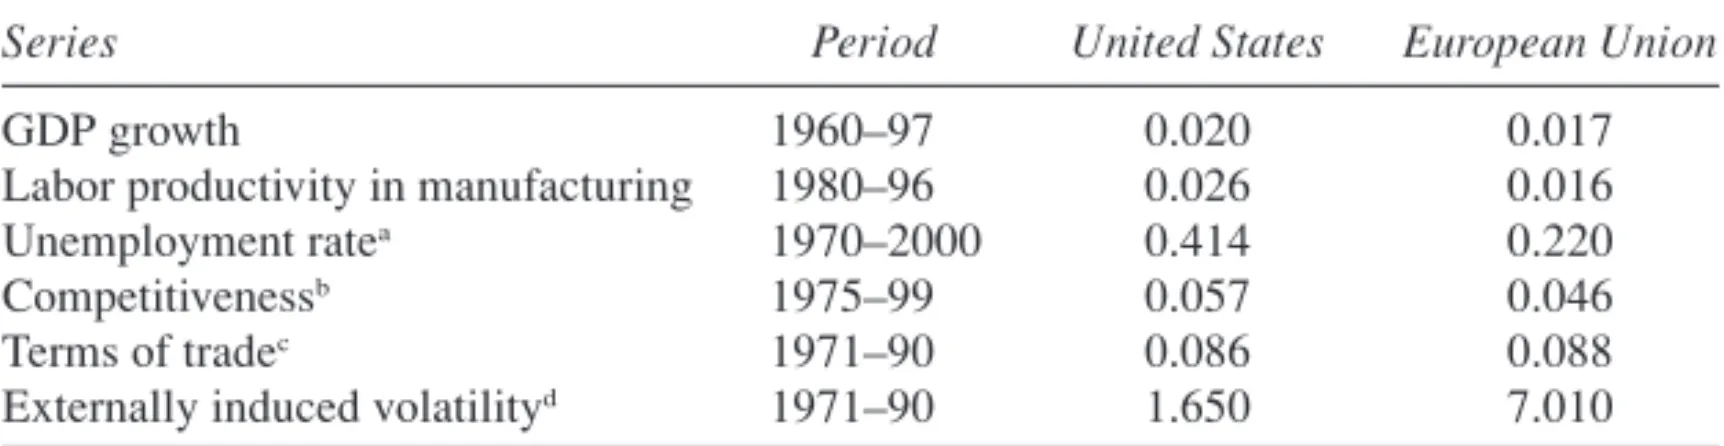 Table 7. Standard Deviations of Selected Economic Indicators in the United States and the European Union, 1960–2000